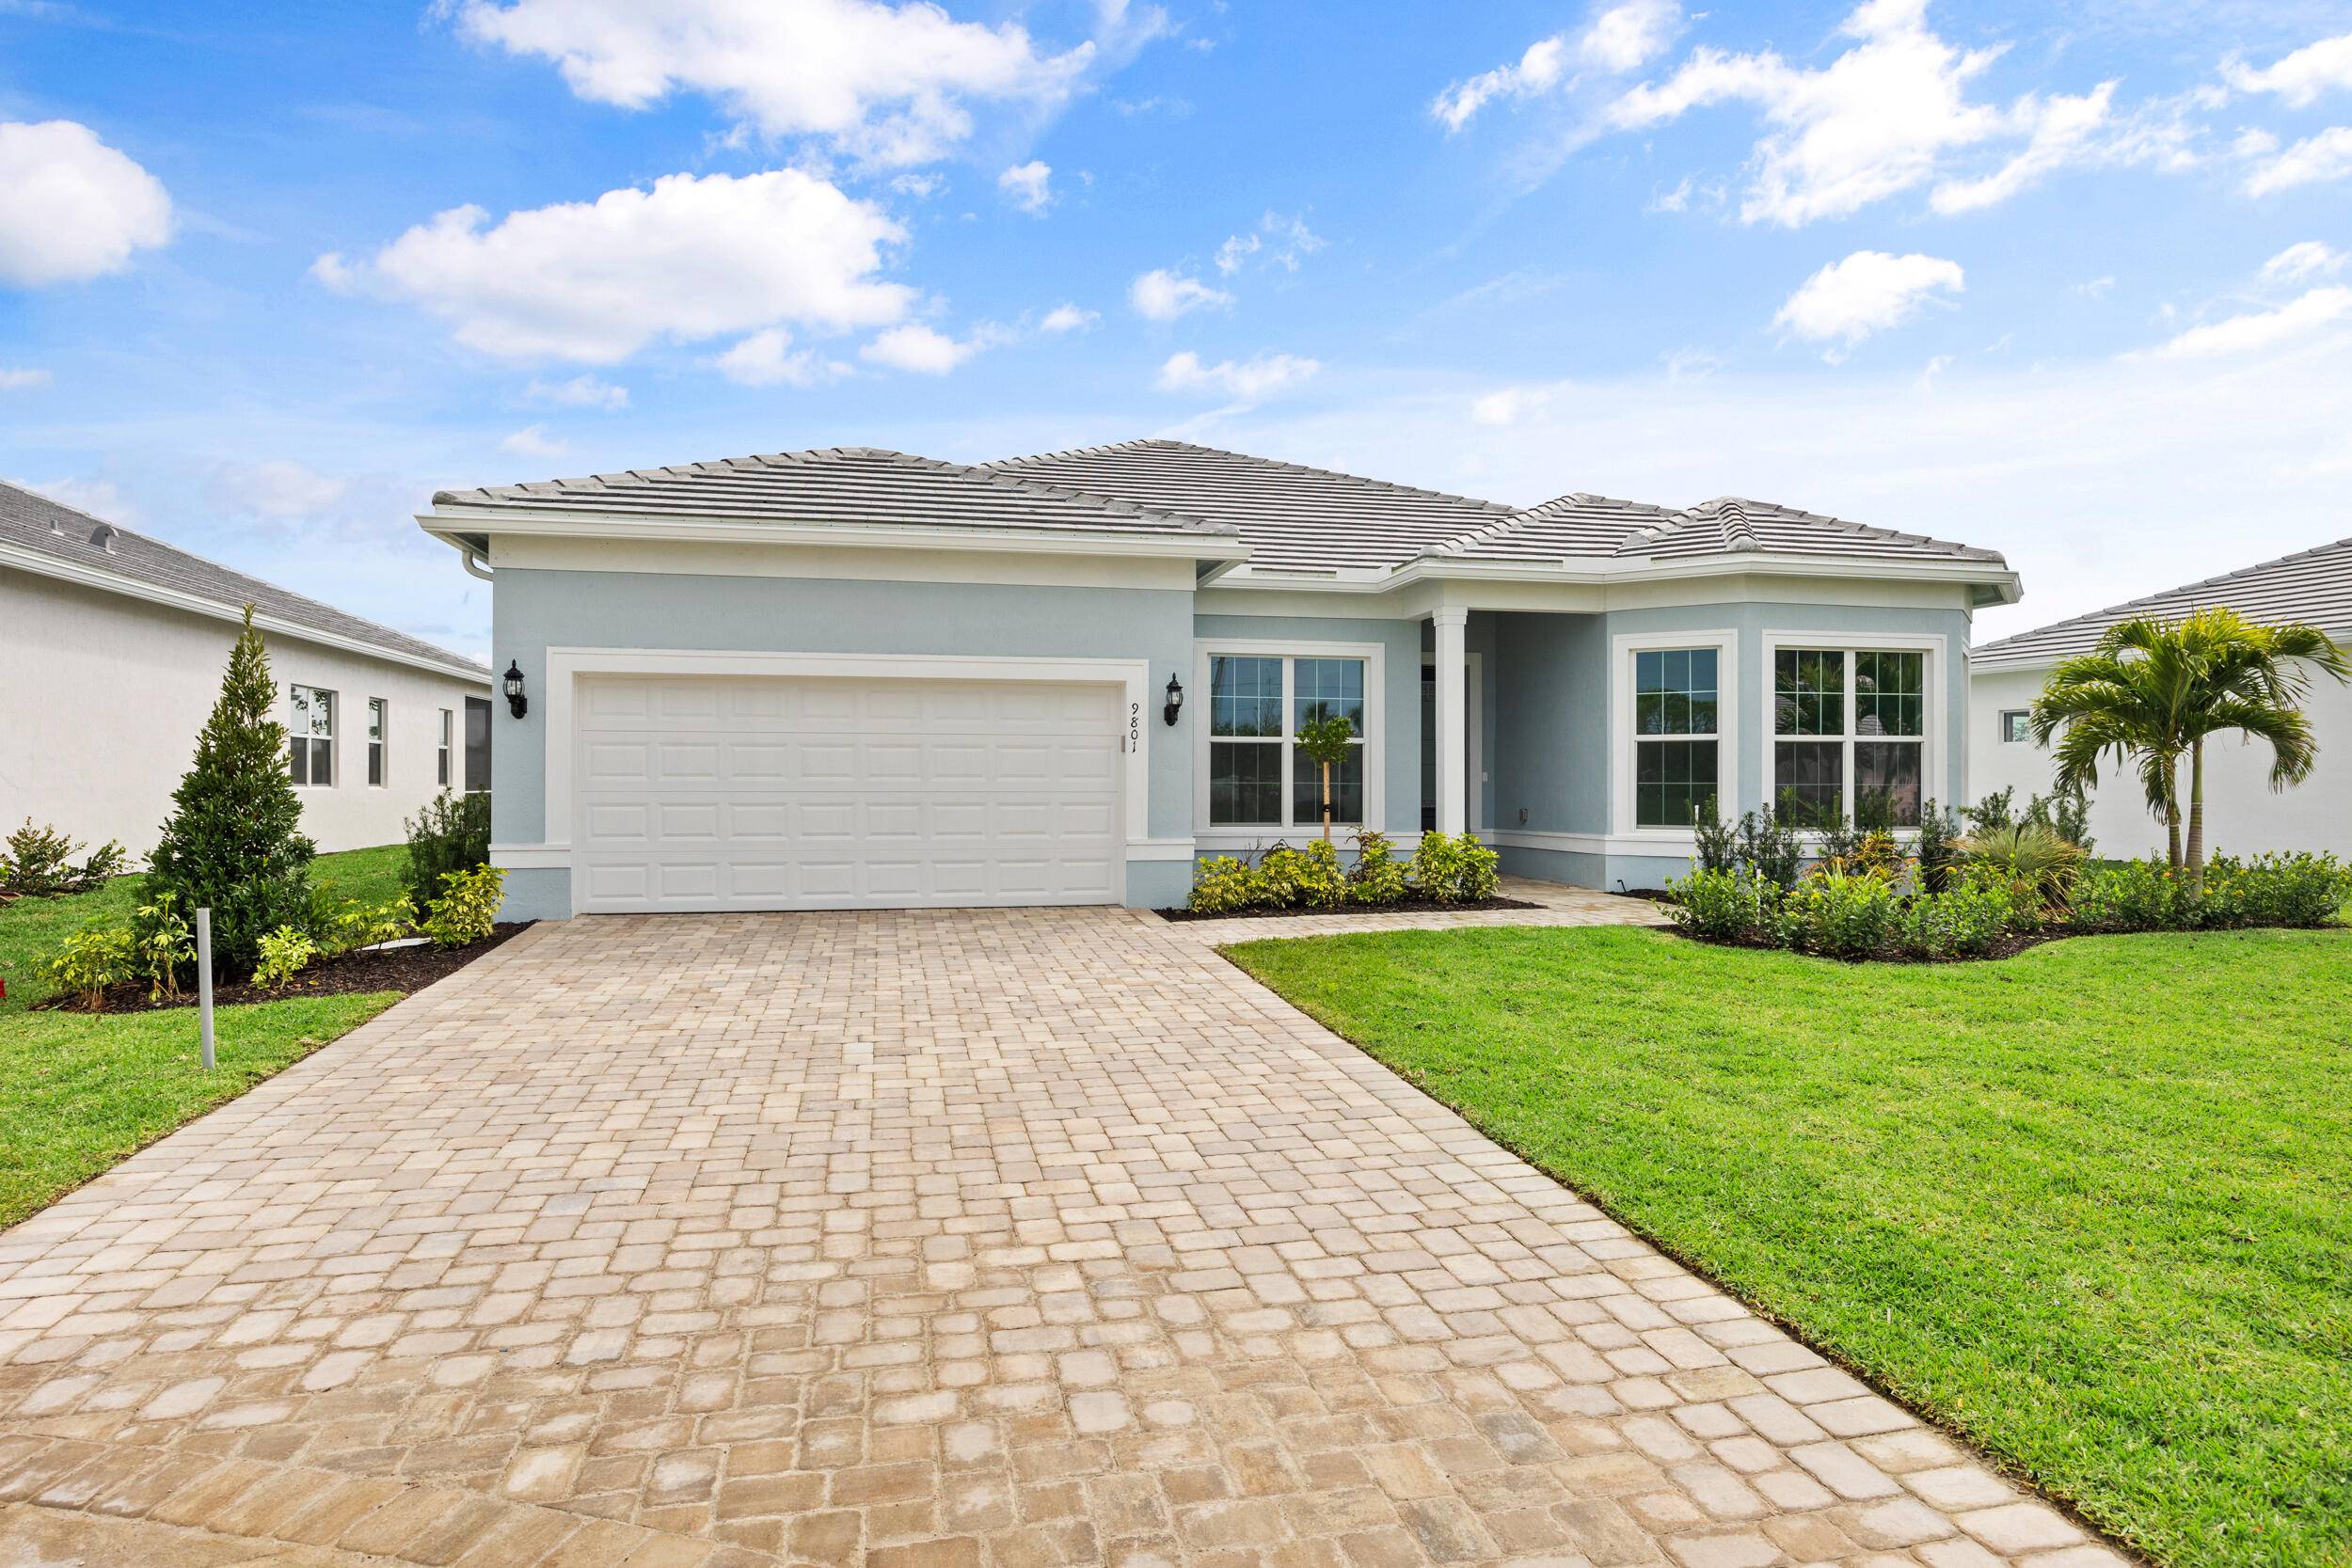 Brand new home in gated community of Highpointe in Stuart.